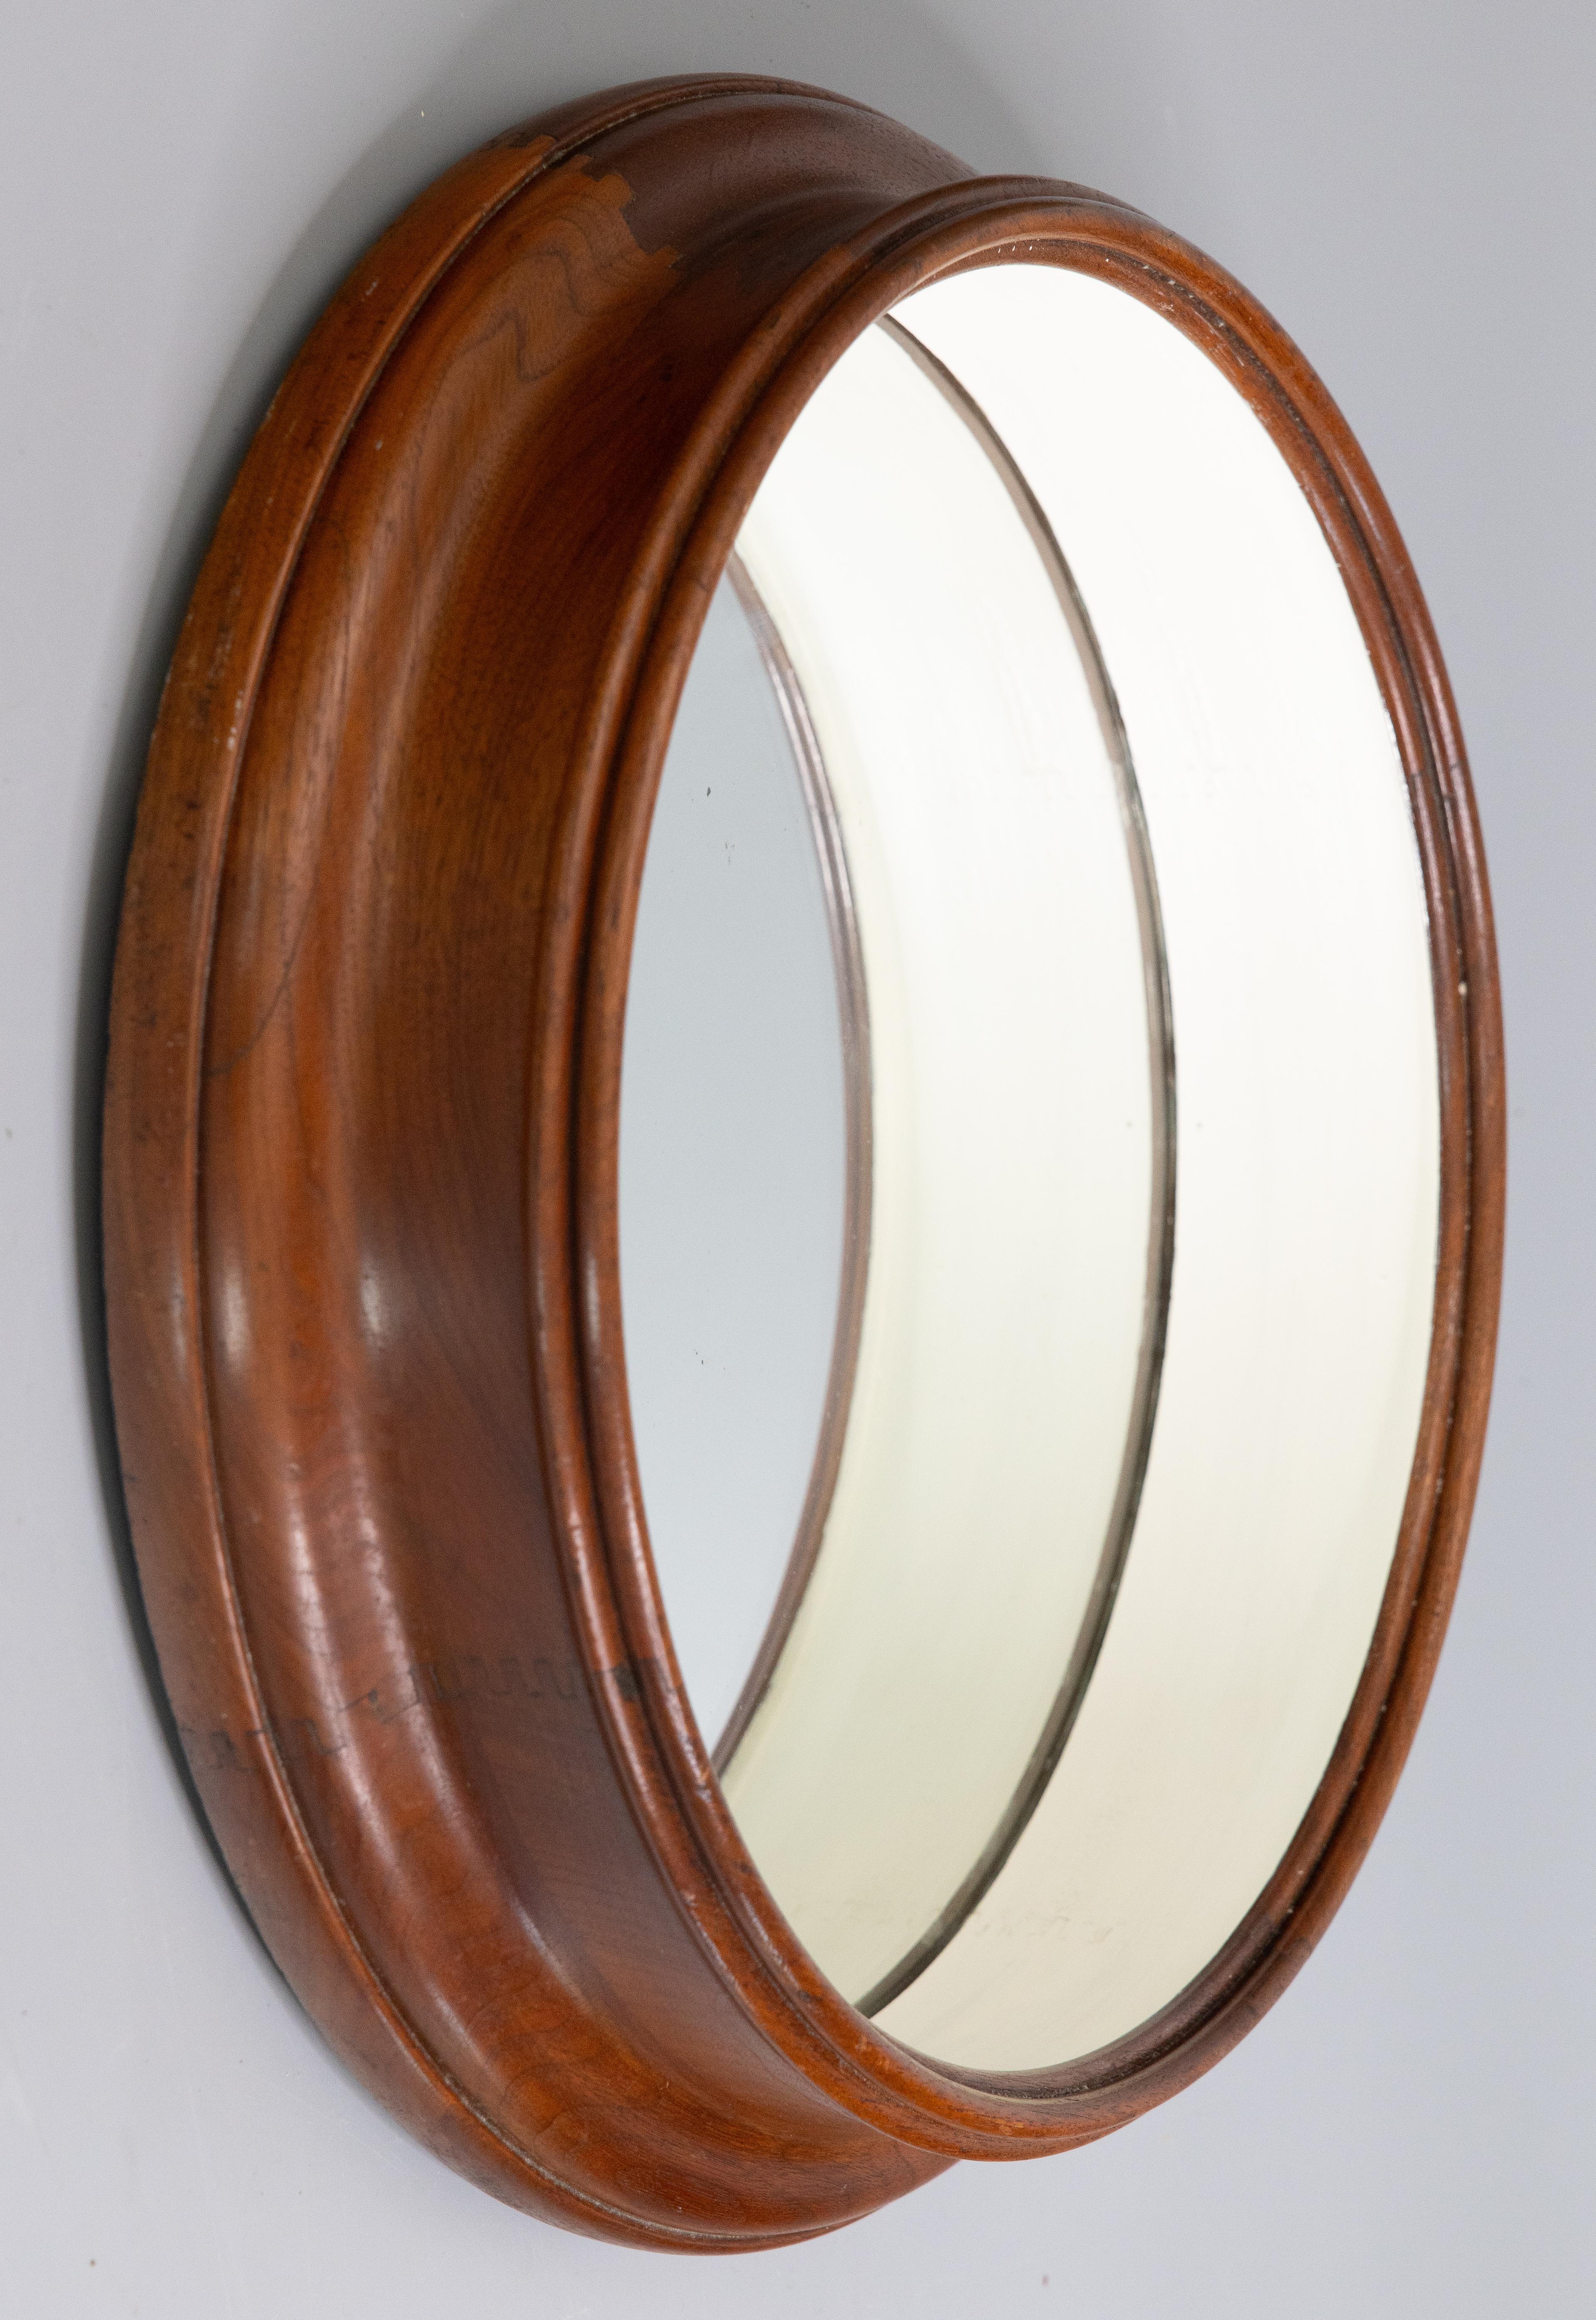 A superb antique English walnut round porthole mirror, circa 1920. This fine mirror is a nice large size with a recessed mirror glass surrounded by a walnut frame in a lovely patina, perfect for any room.

DIMENSIONS
17.5ʺW × 4ʺD × 17.5ʺH